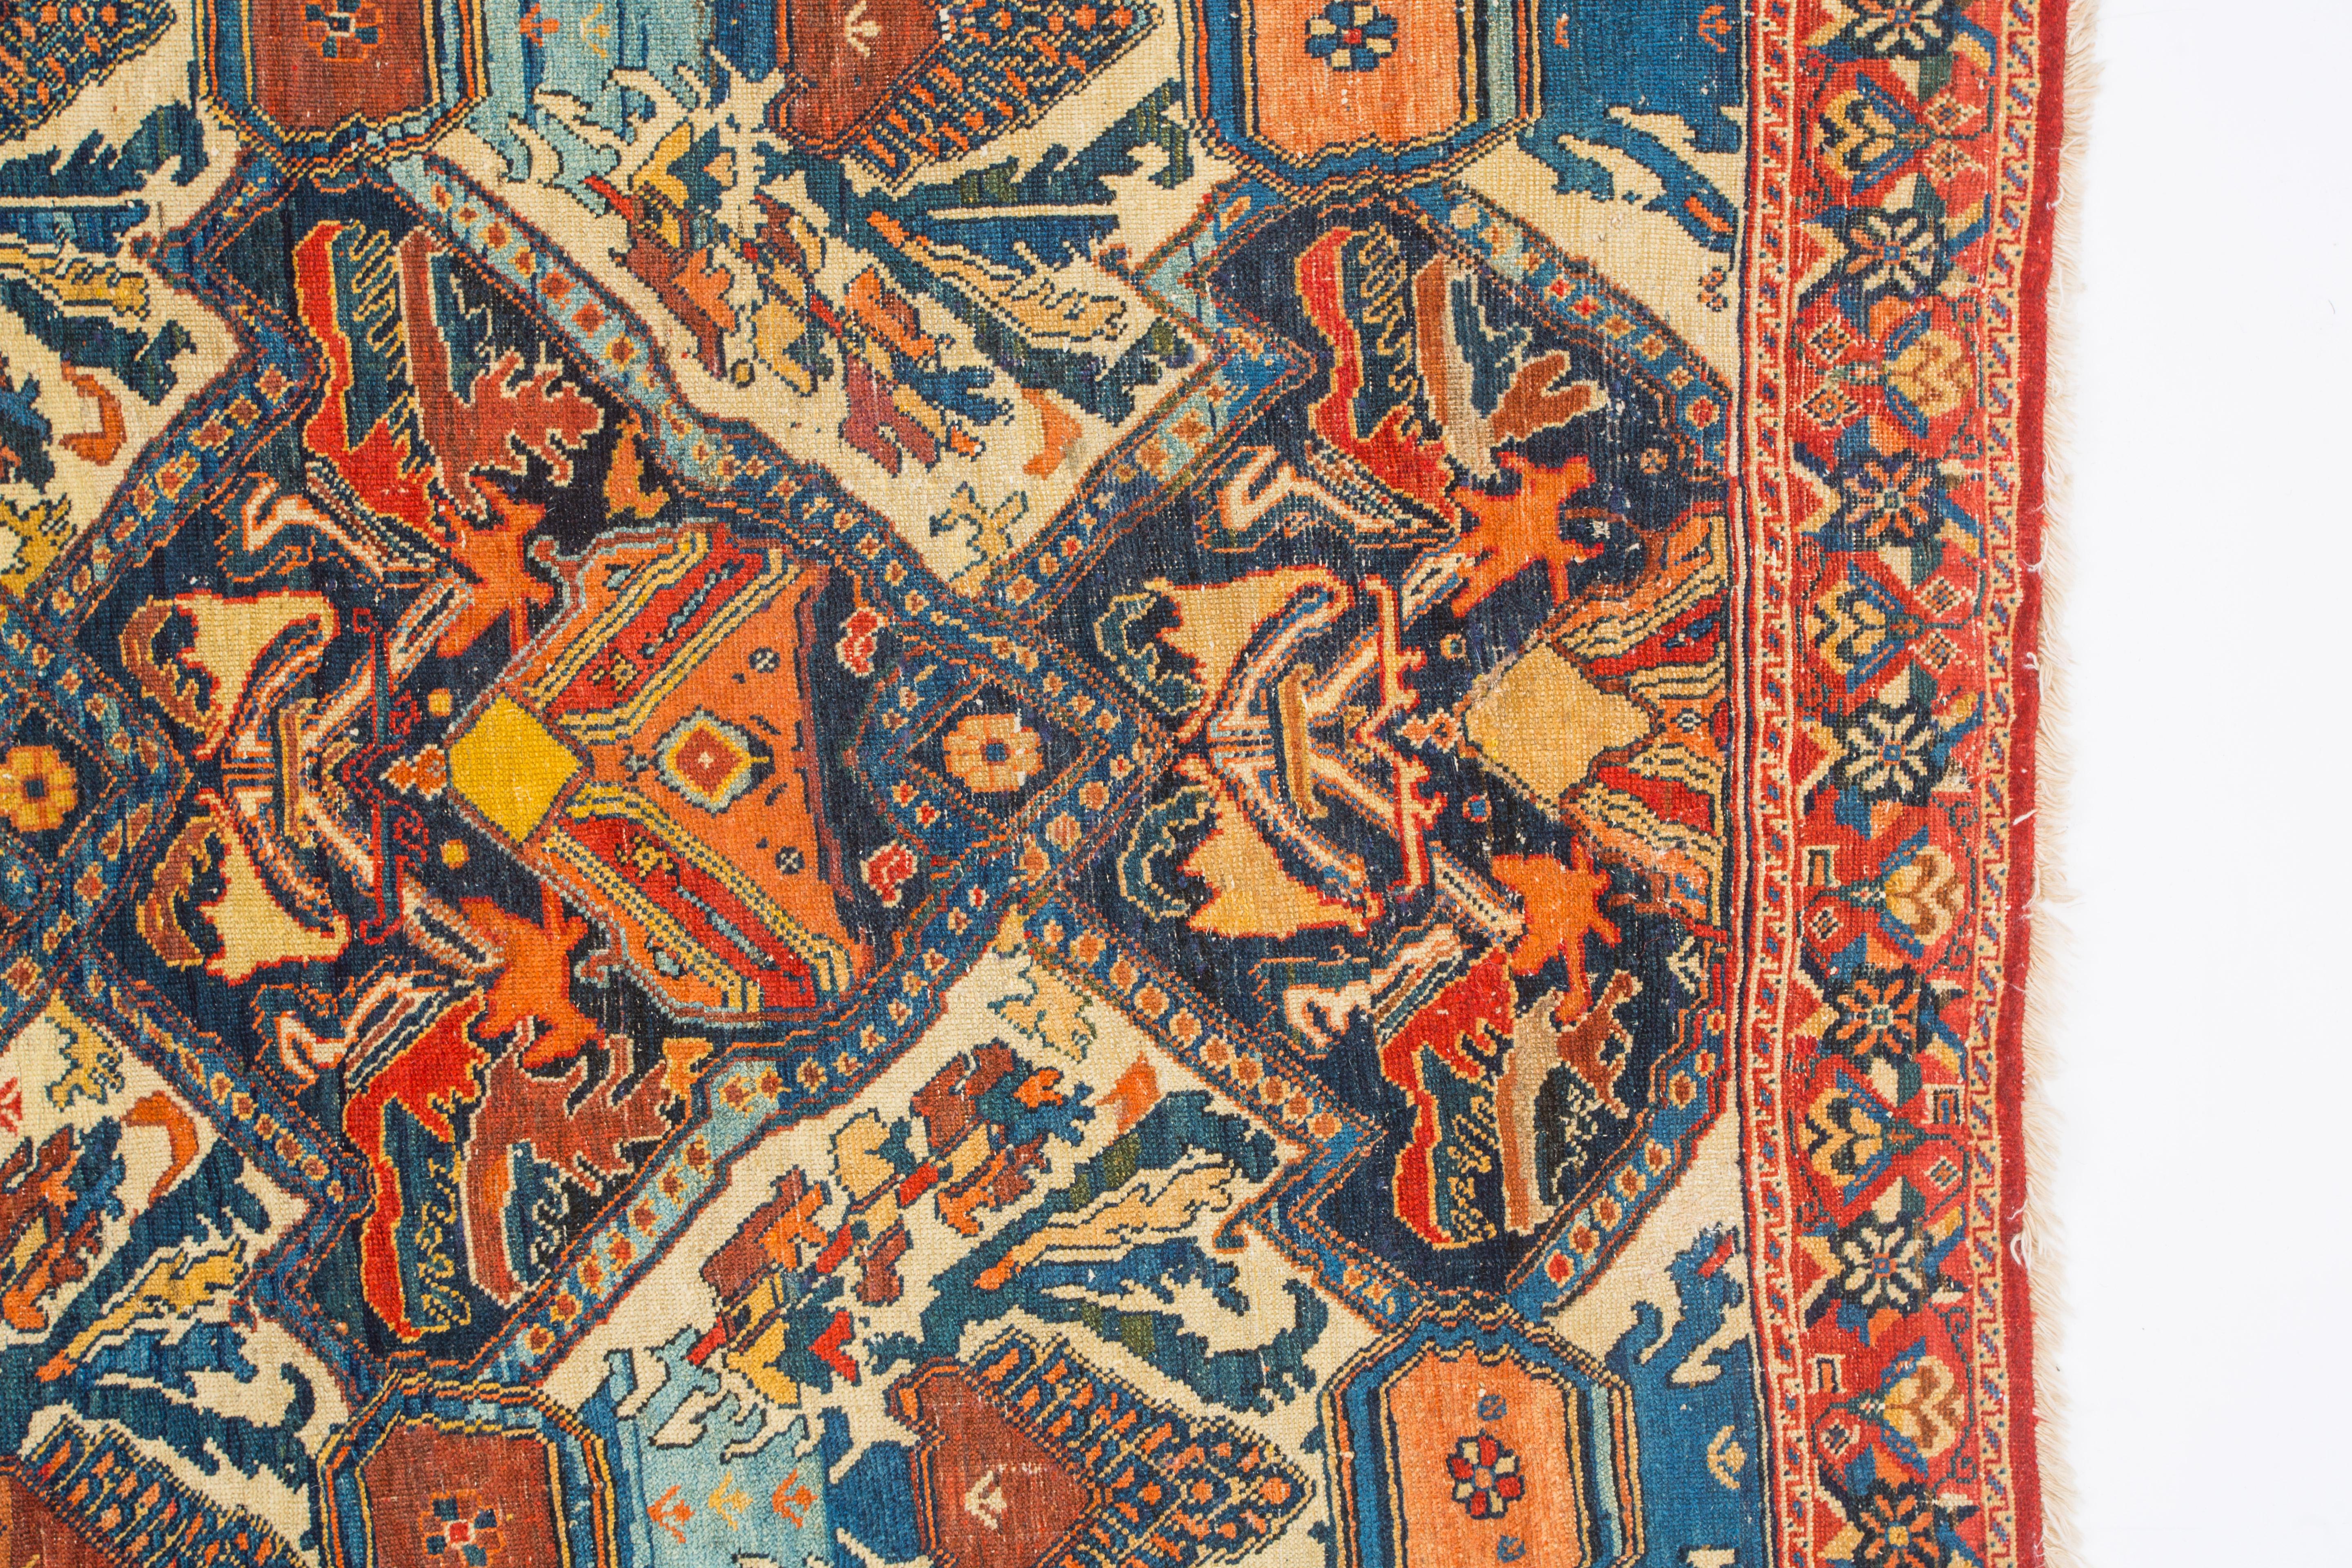 Woven Astonishing 19th Century Rare Afshar Tribal rug  featured in famous book  For Sale